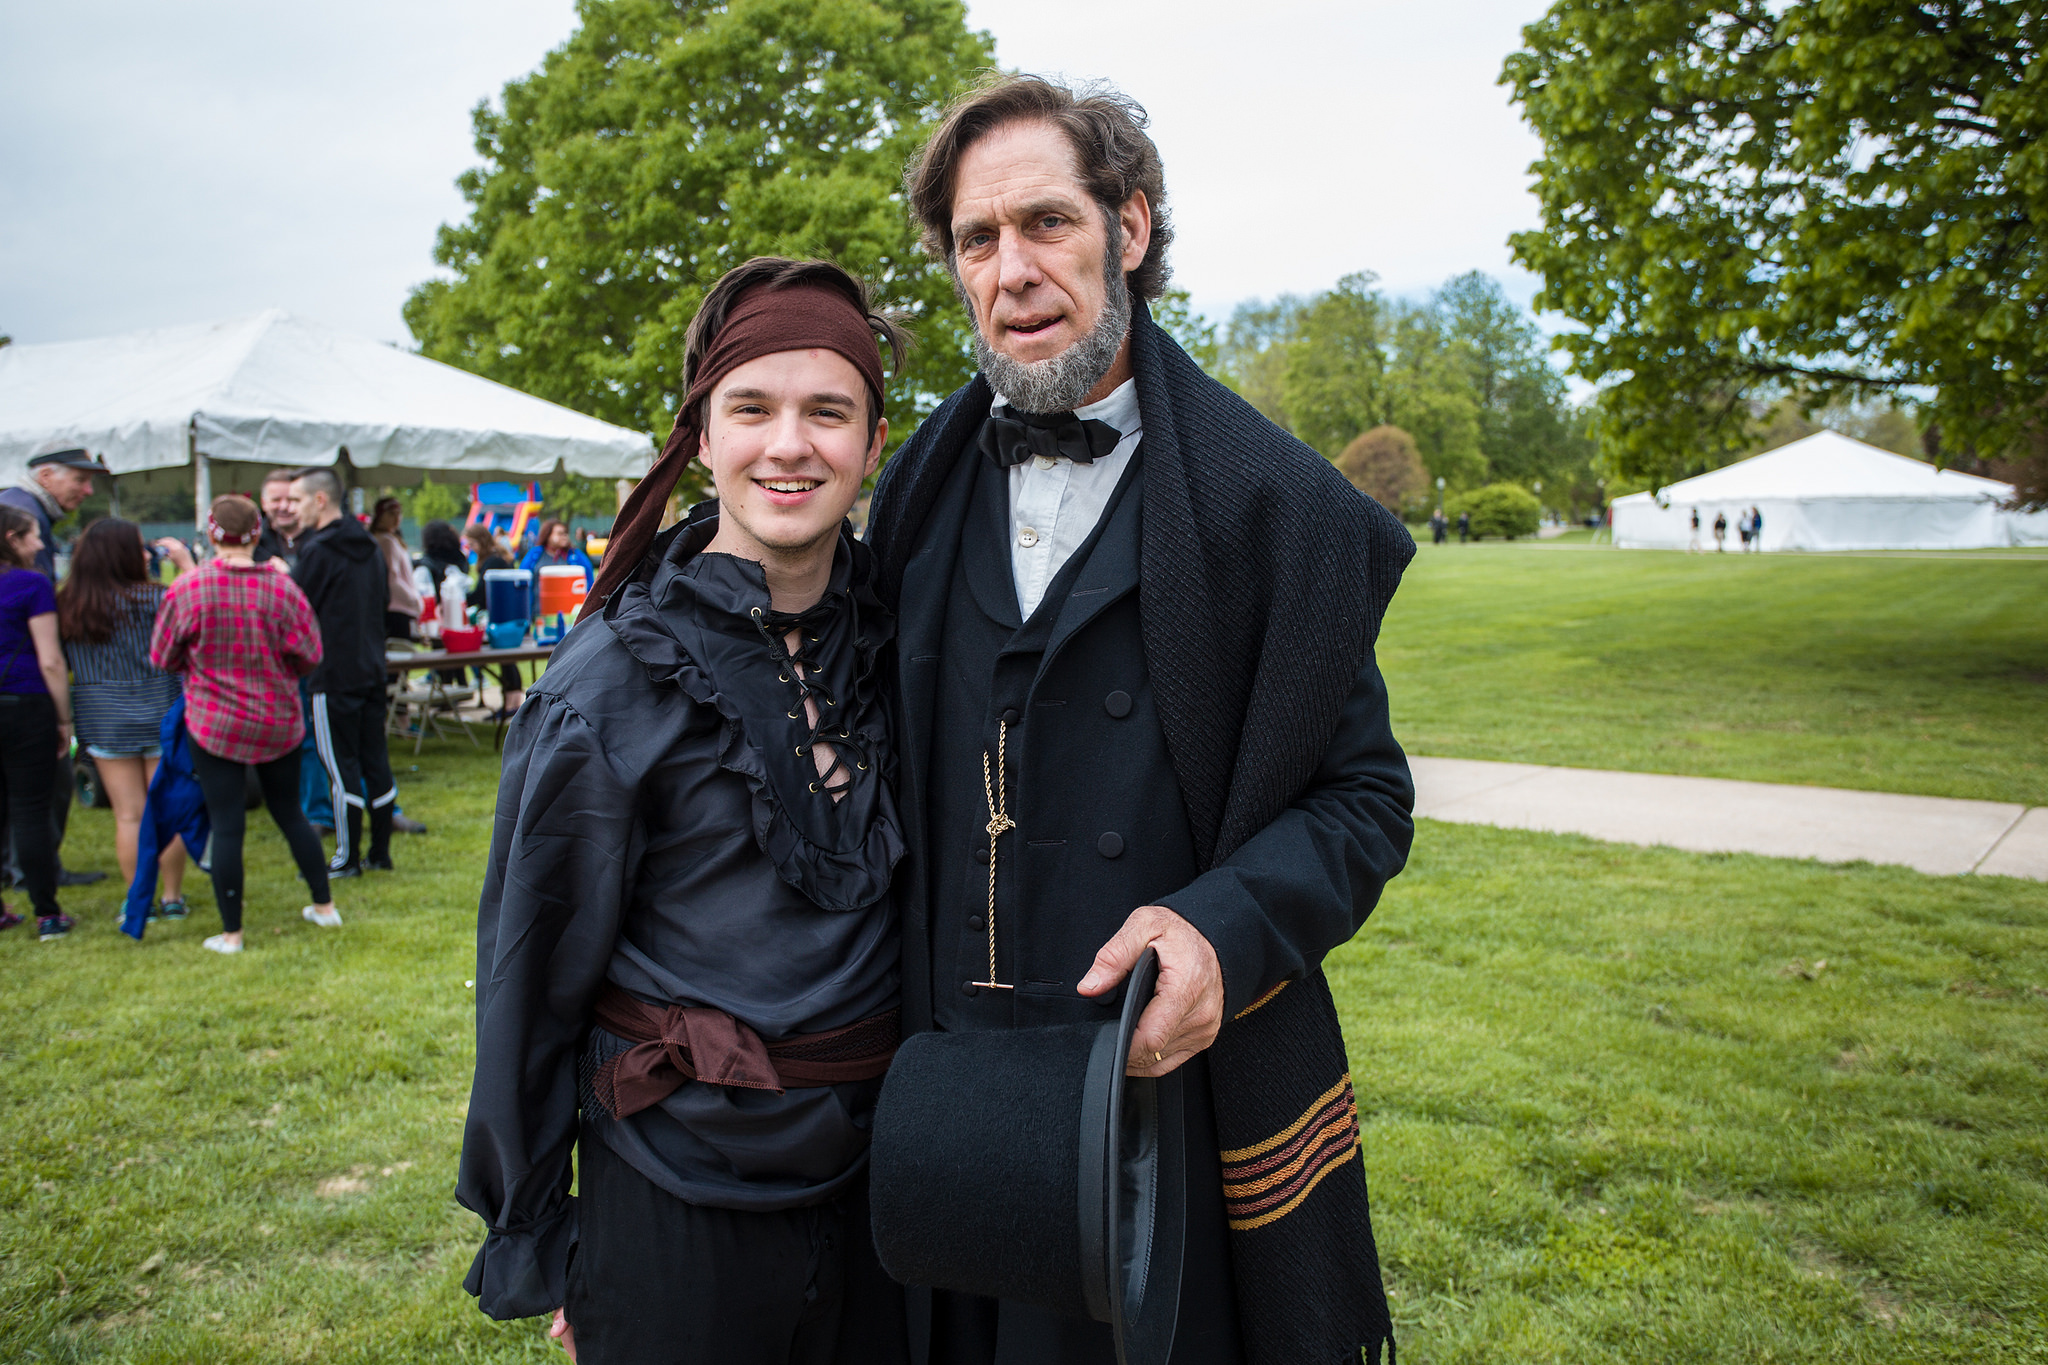 A Flunk Day pirate poses with Abraham Lincoln at Flunk Day 2017.